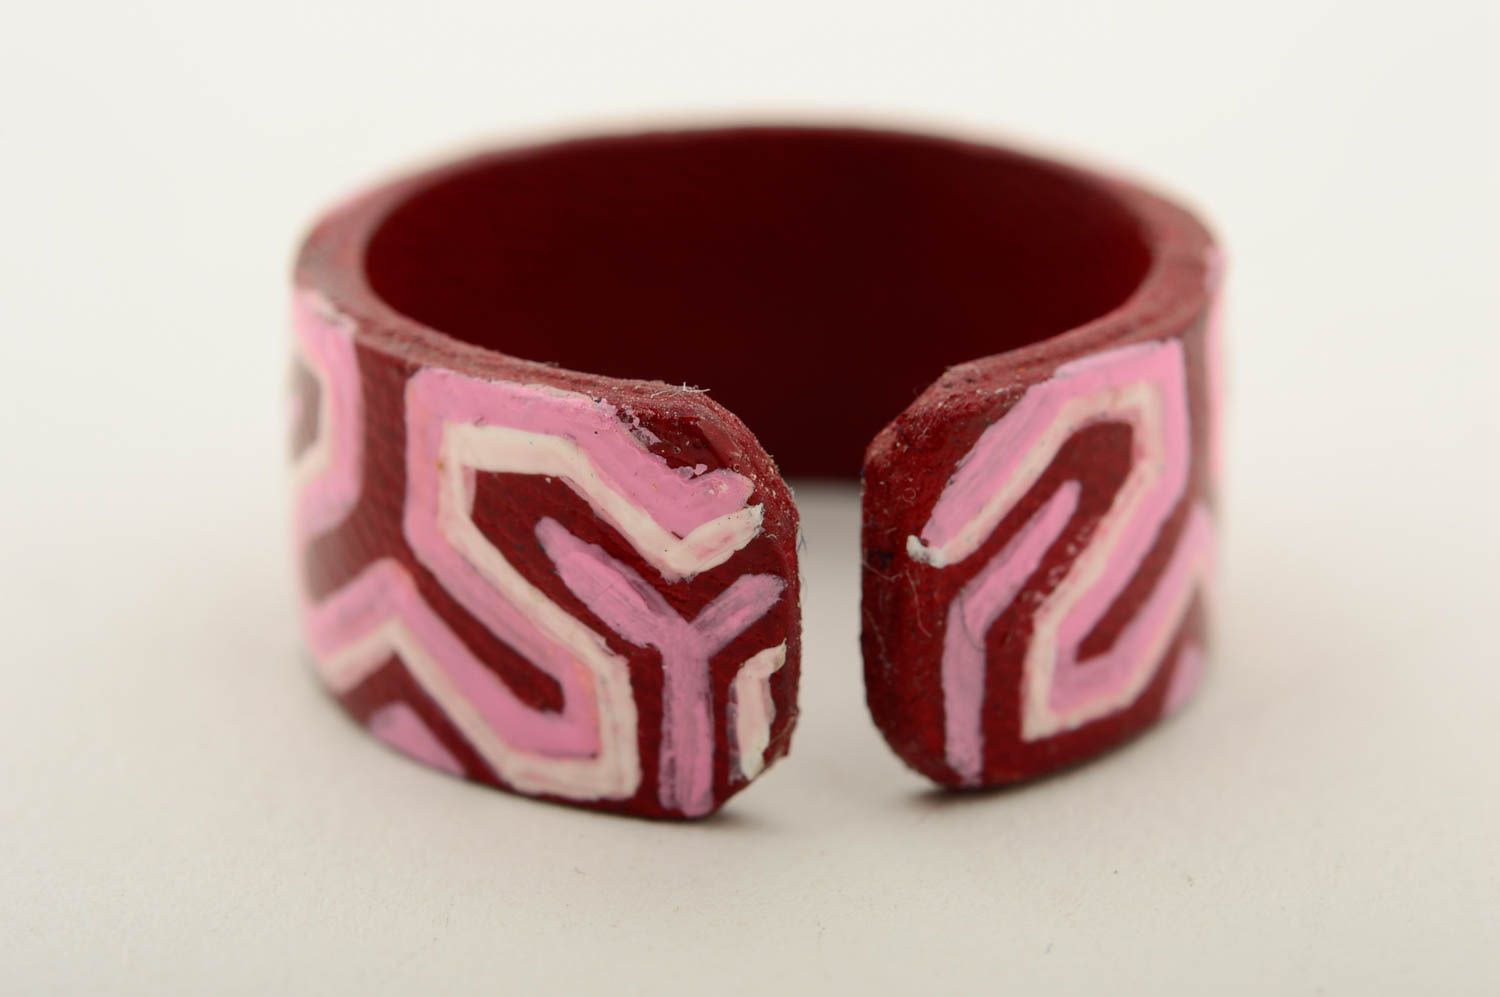 Handmade Leather Goods Rings for Women Unique Rings Fashion Accessories 